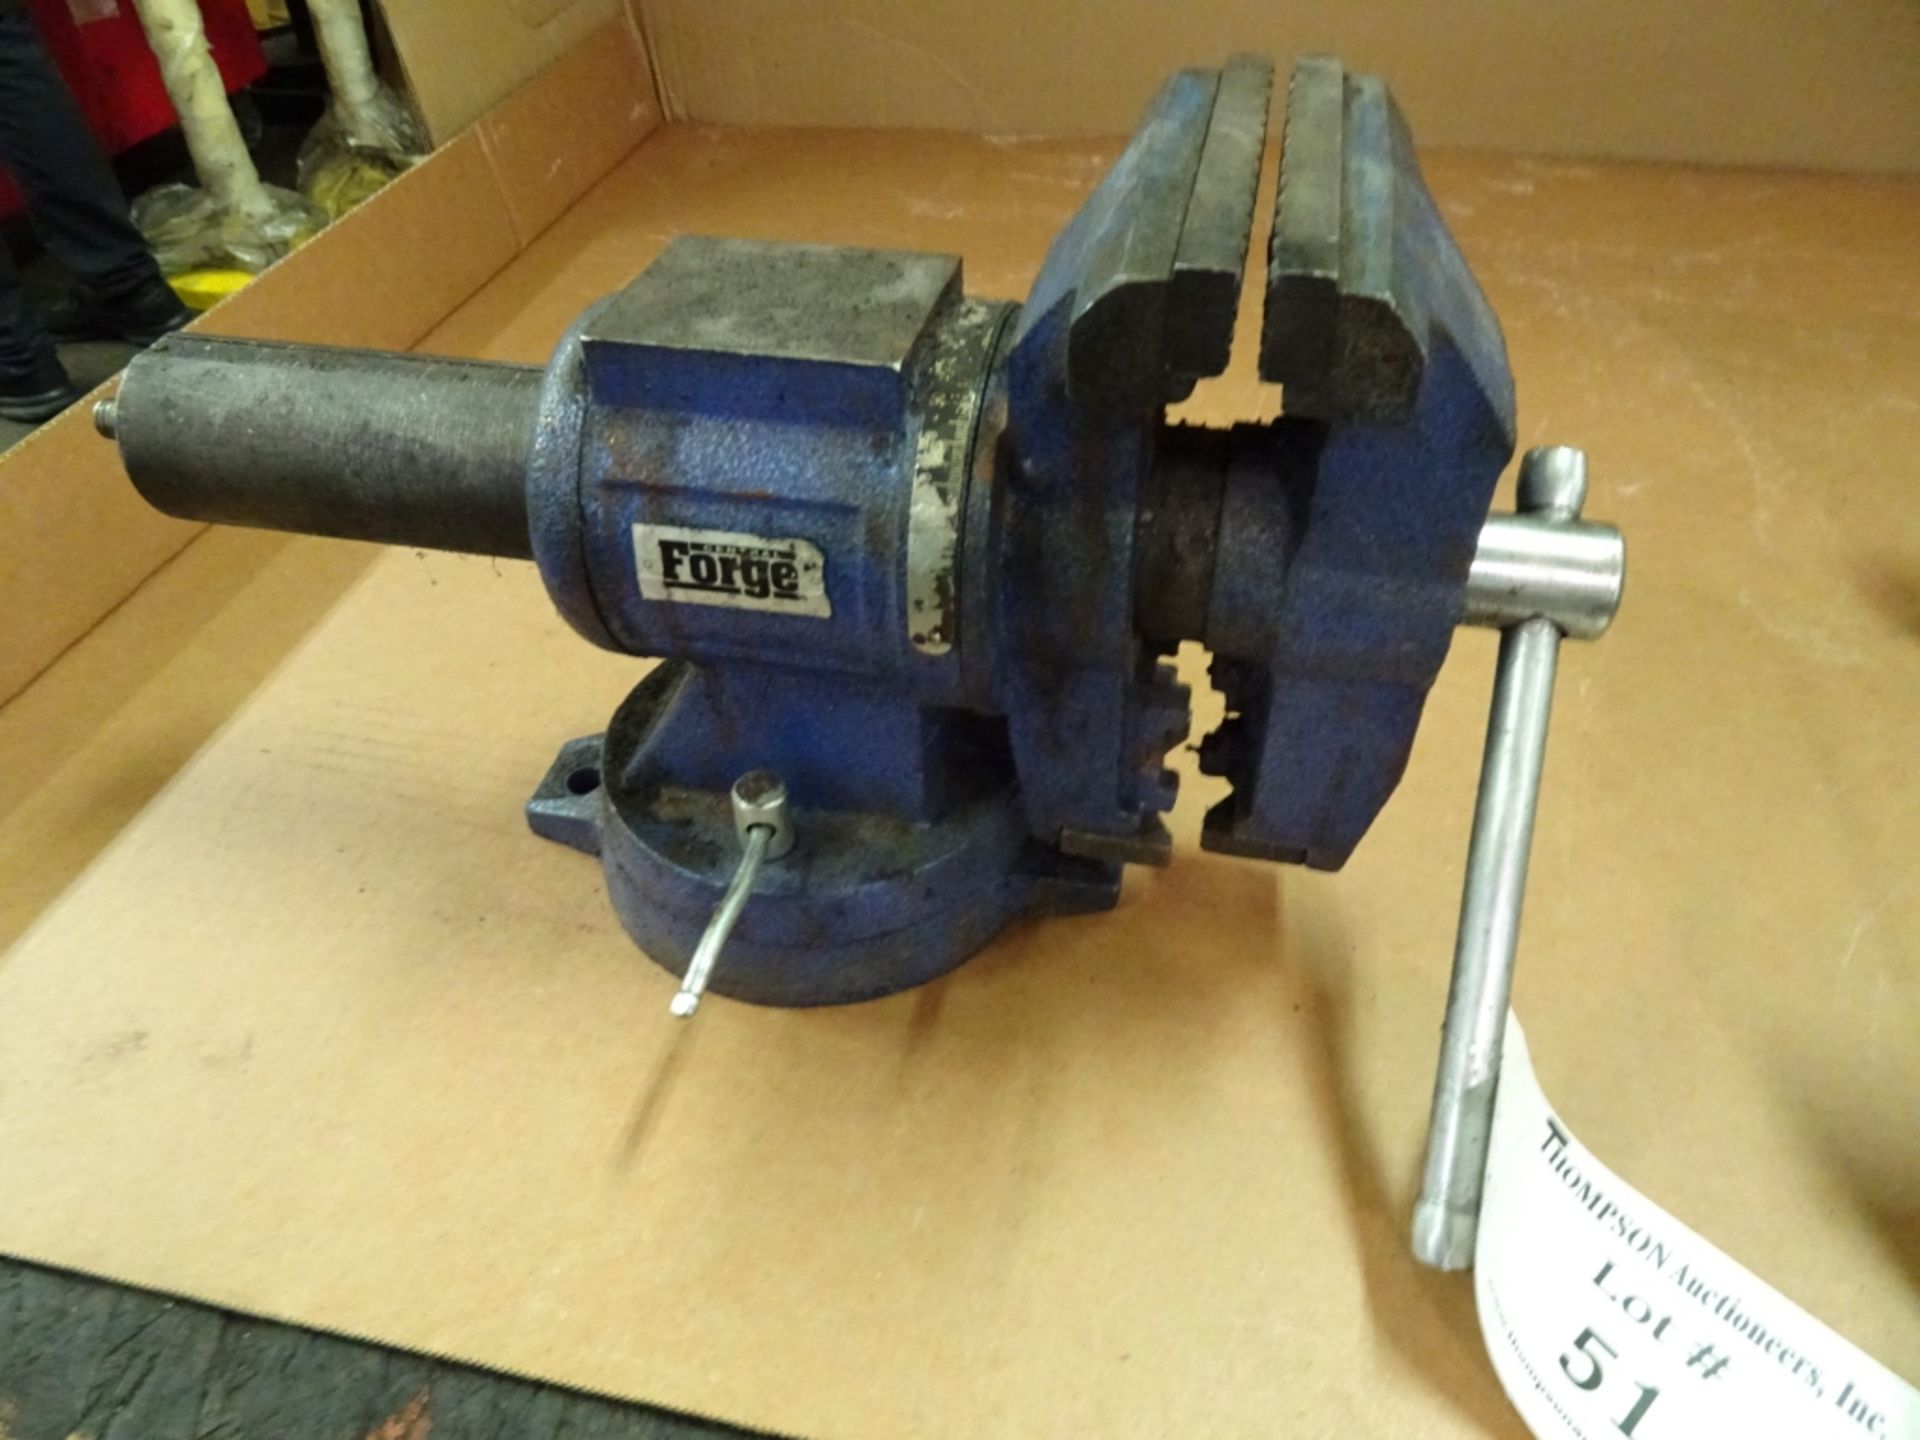 Forge 4" Bench Vise With Pipe Clamp and Swivel Base